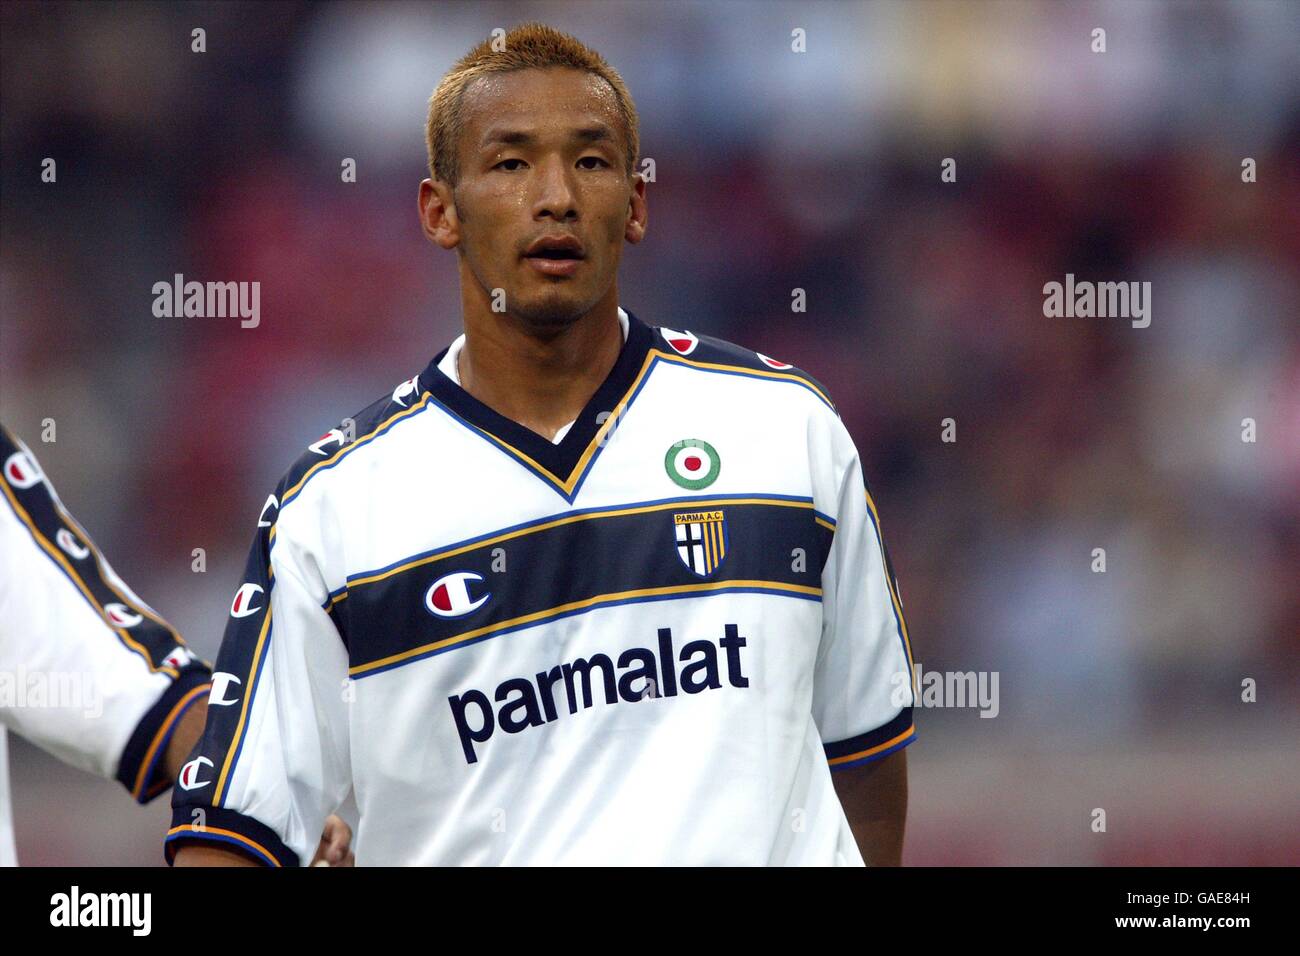 Parma's Hidetoshi Nakata during the match against Barcelona Stock Photo